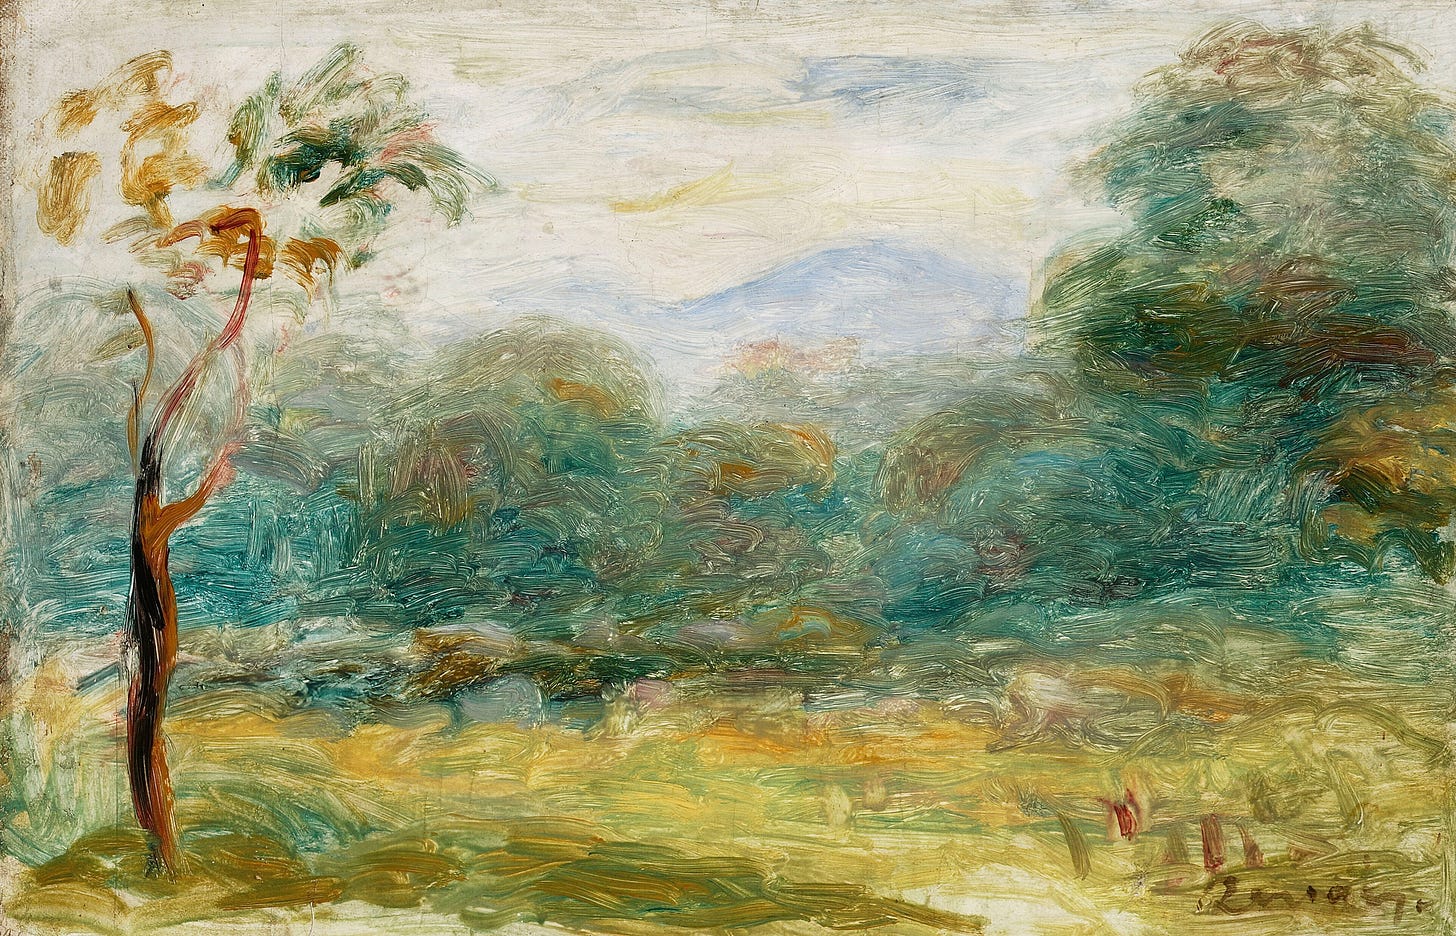 Landscape from the south of France (Cagnes-sur-Mer) (1911) by Pierre-Auguste Renoir